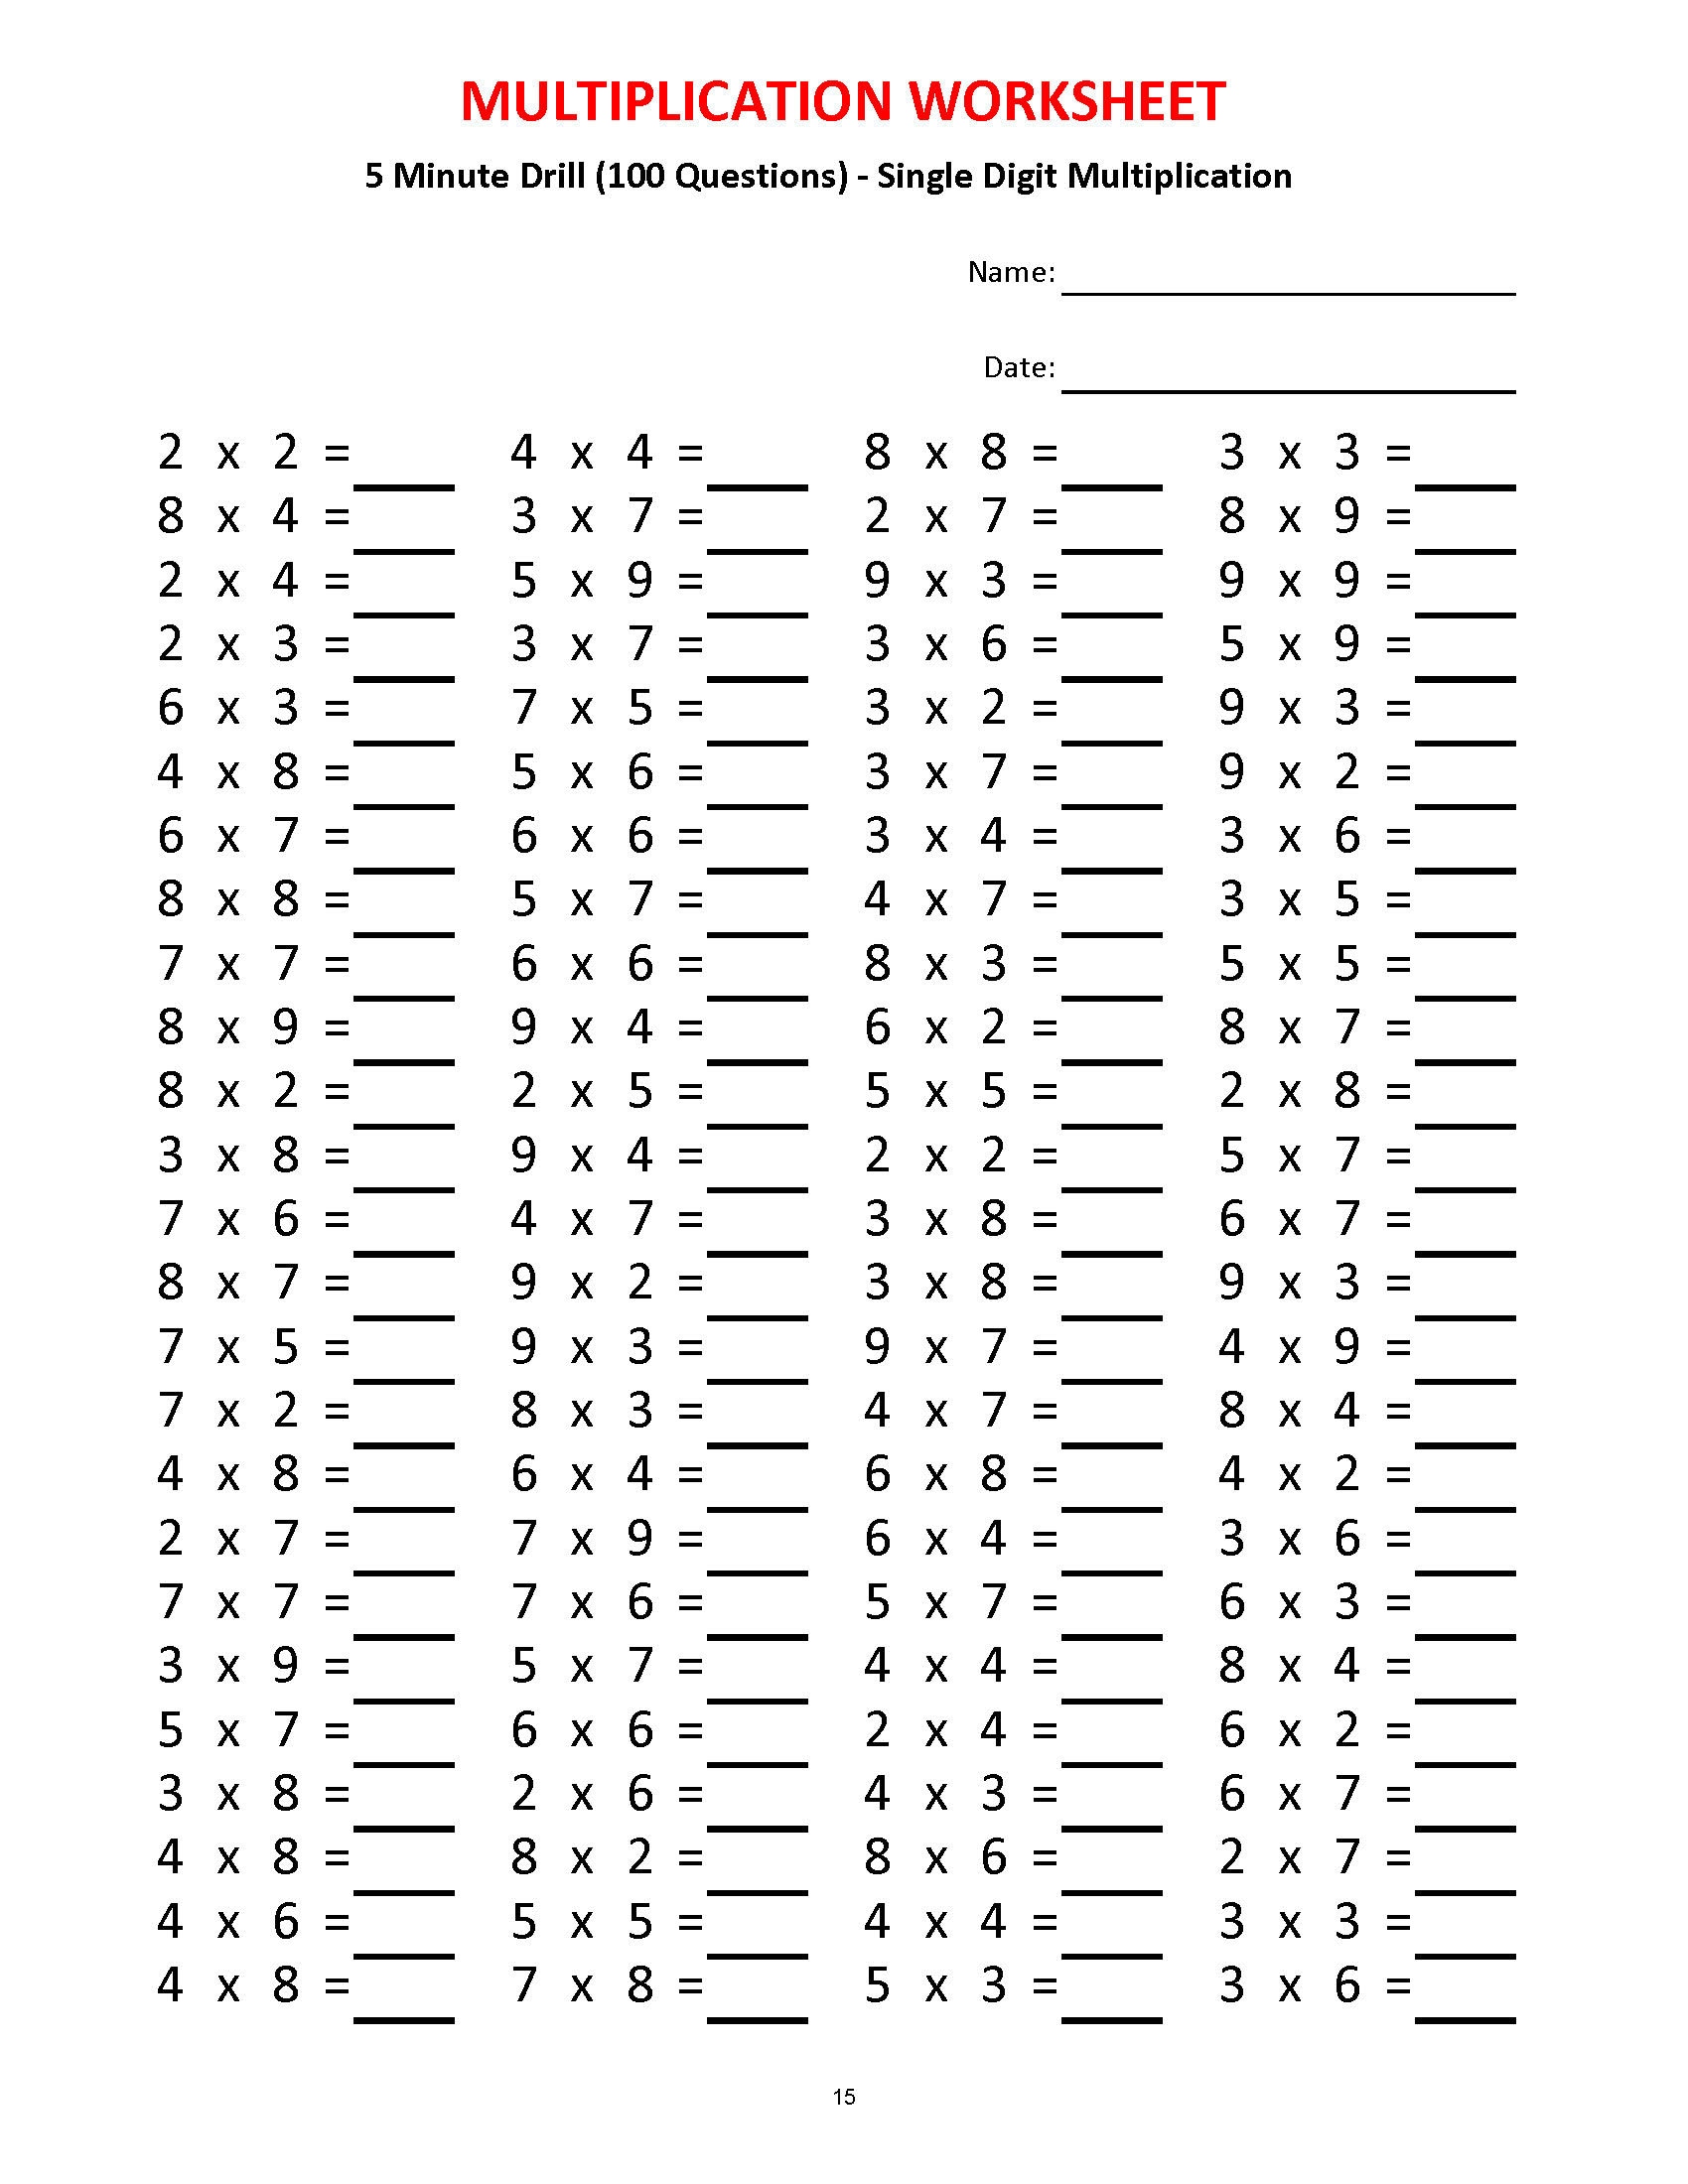 multiplication-5-minute-drill-worksheets-with-answers-pdf-etsy